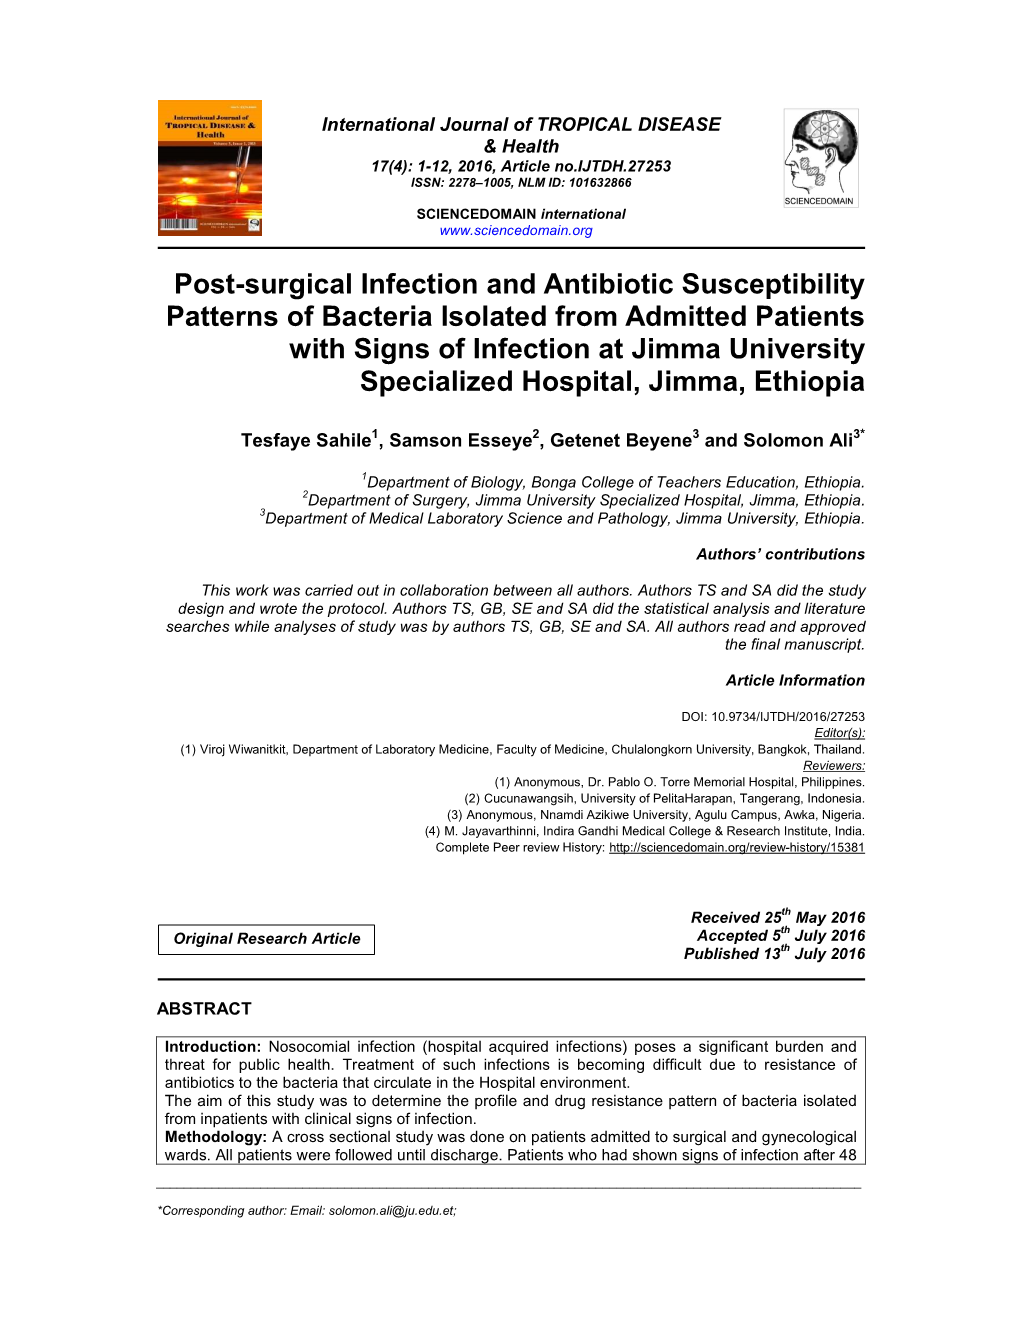 Post-Surgical Infection and Antibiotic Susceptibility Patterns of Bacteria Isolated from Admitted Patients with Signs of Infecti